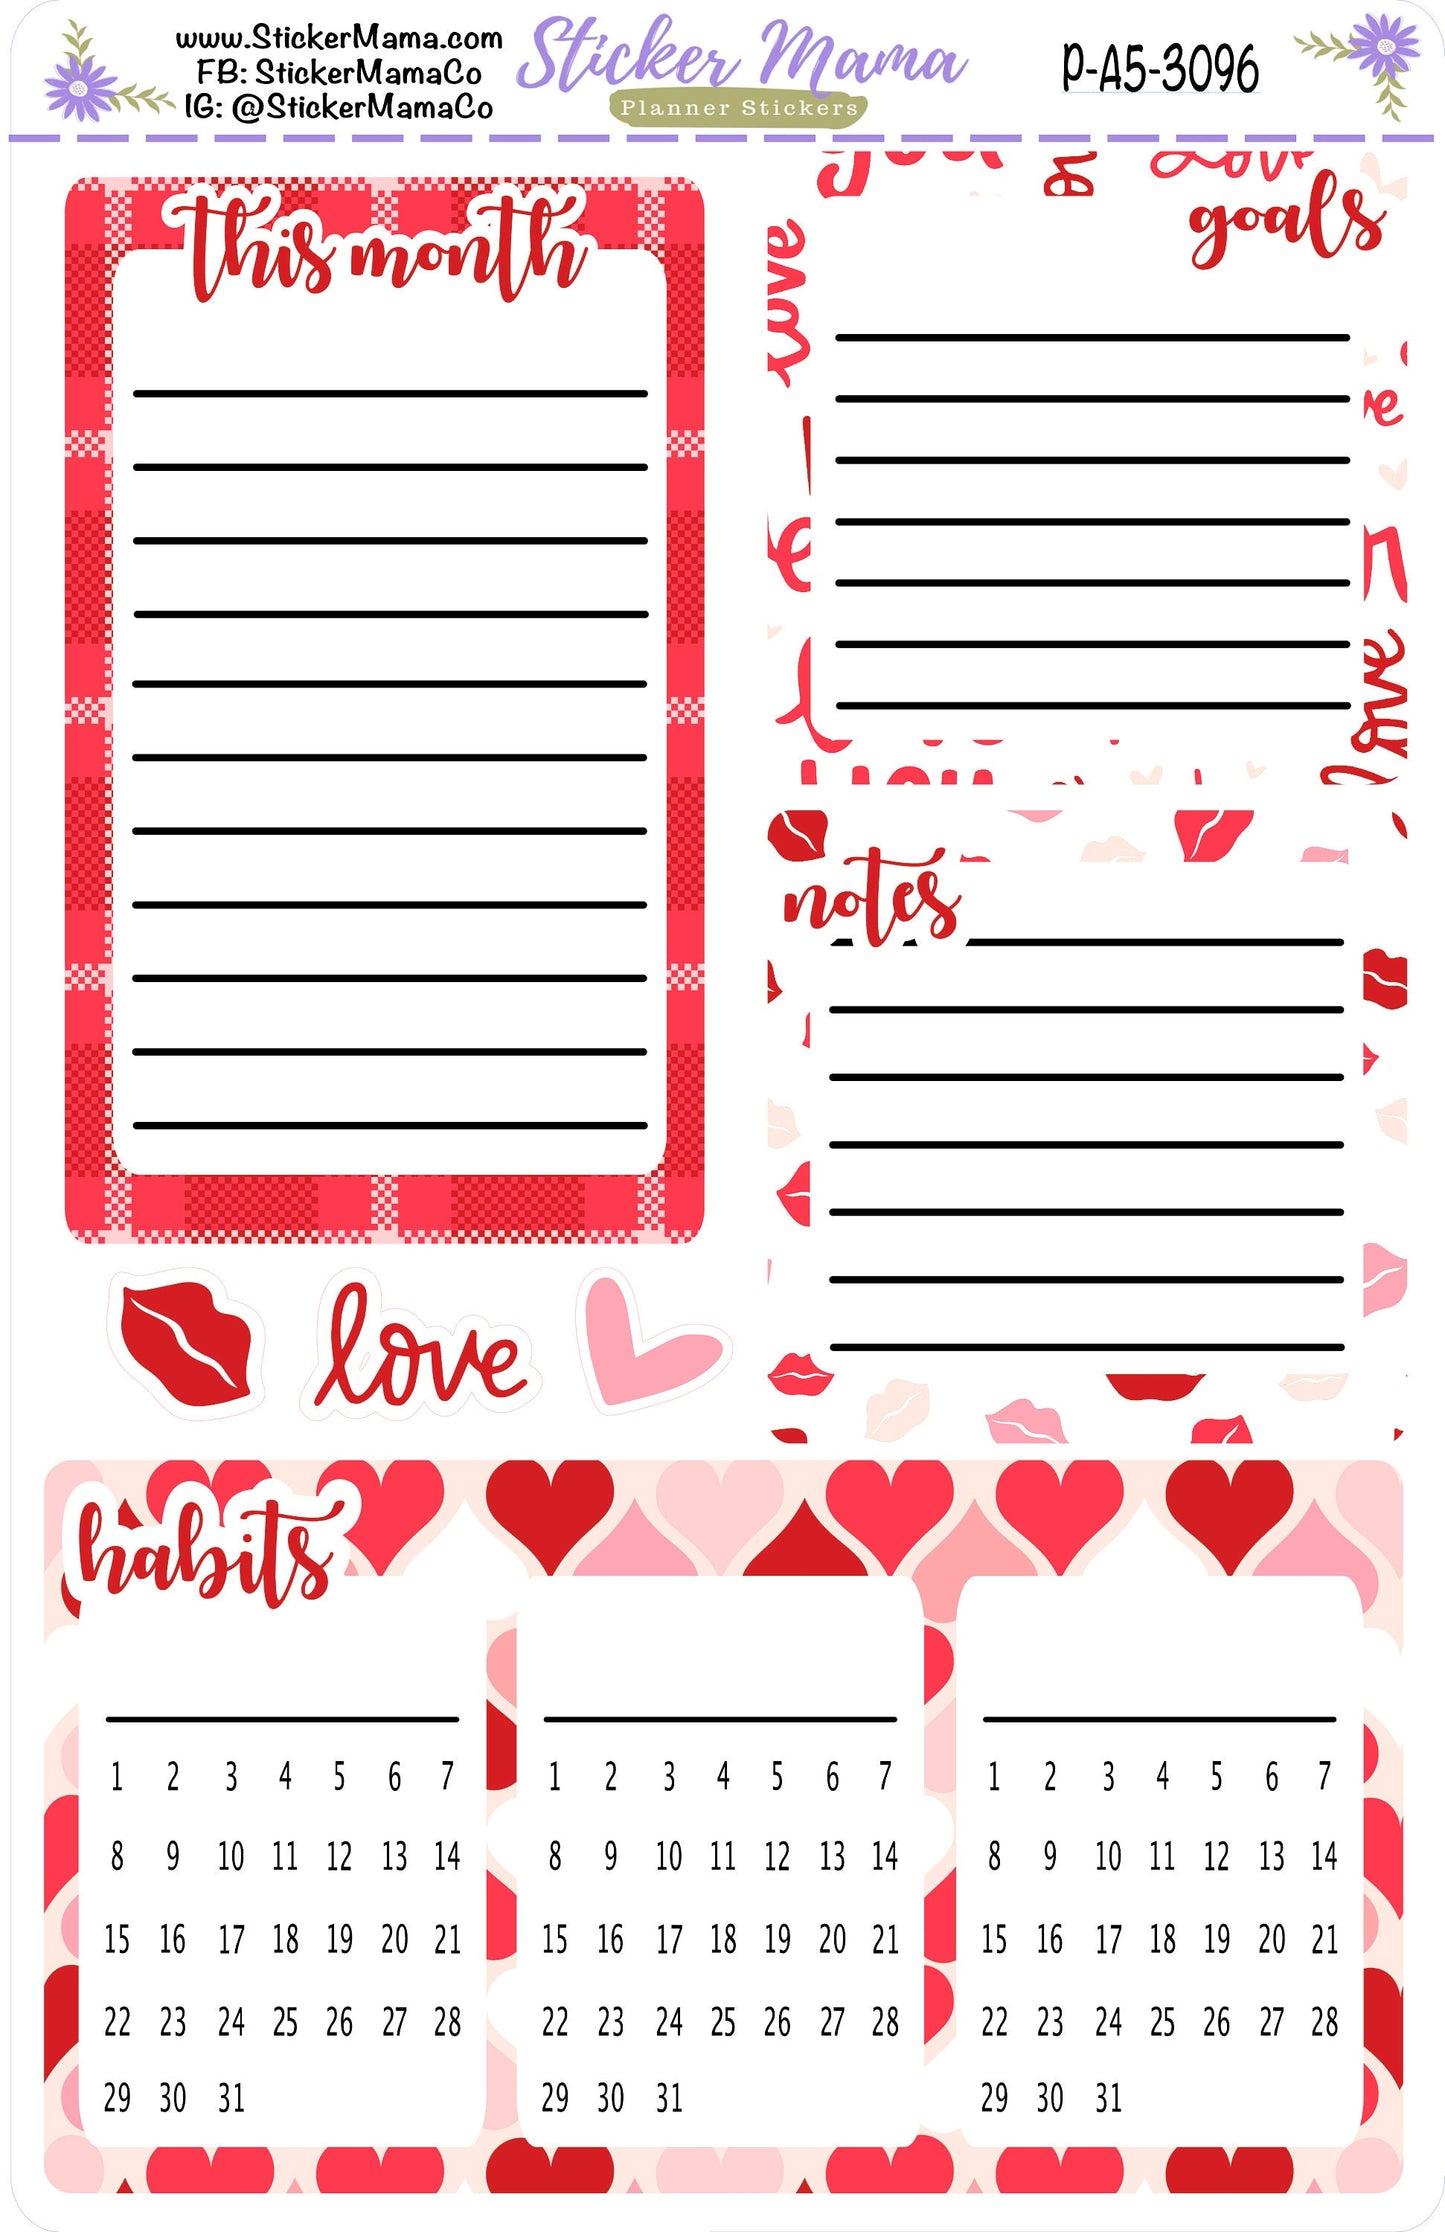 3096 - HEARTS 'N KISSES  || A5 or 7x9 Productivity Dashboard Sticker || eclp notes page stickers || productivity planner